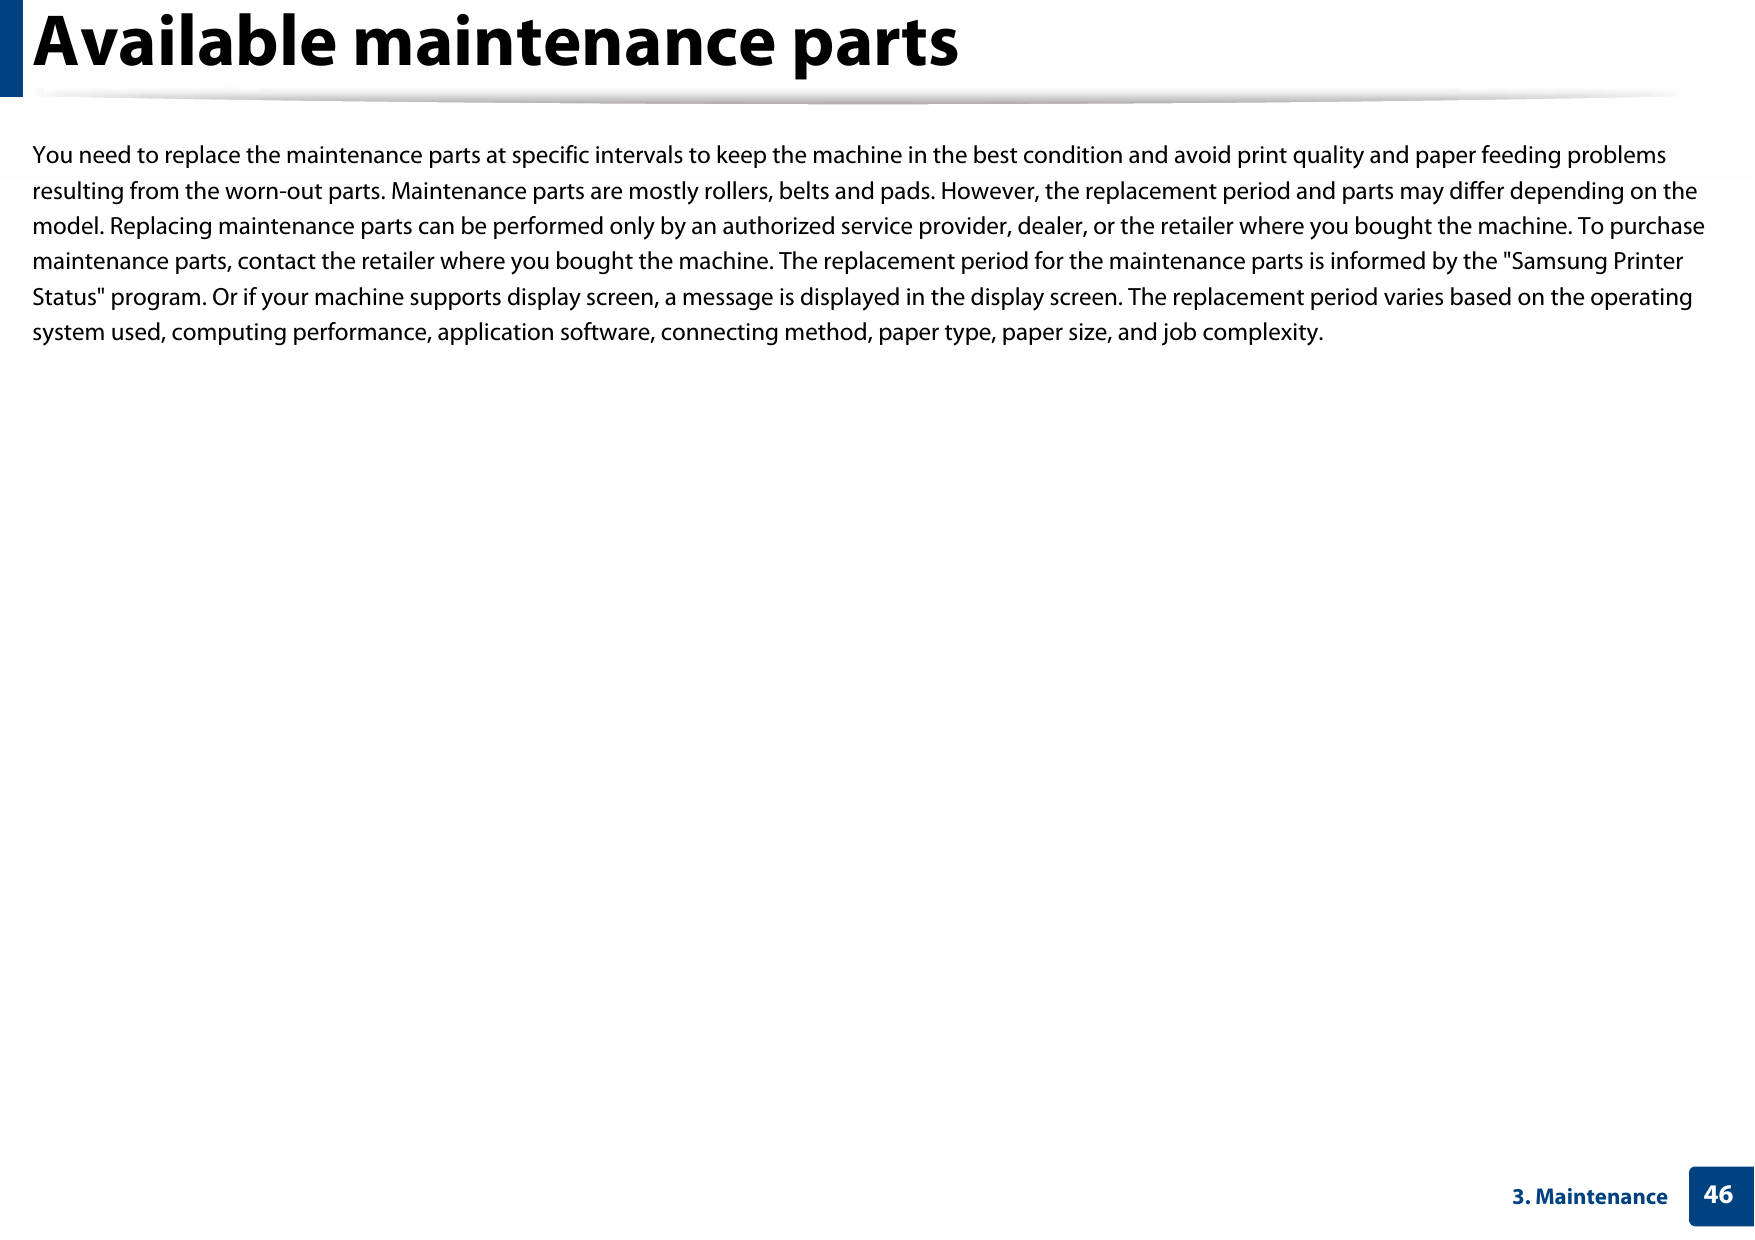 463. MaintenanceAvailable maintenance partsYou need to replace the maintenance parts at specific intervals to keep the machine in the best condition and avoid print quality and paper feeding problems resulting from the worn-out parts. Maintenance parts are mostly rollers, belts and pads. However, the replacement period and parts may differ depending on the model. Replacing maintenance parts can be performed only by an authorized service provider, dealer, or the retailer where you bought the machine. To purchase maintenance parts, contact the retailer where you bought the machine. The replacement period for the maintenance parts is informed by the &quot;Samsung Printer Status&quot; program. Or if your machine supports display screen, a message is displayed in the display screen. The replacement period varies based on the operating system used, computing performance, application software, connecting method, paper type, paper size, and job complexity.